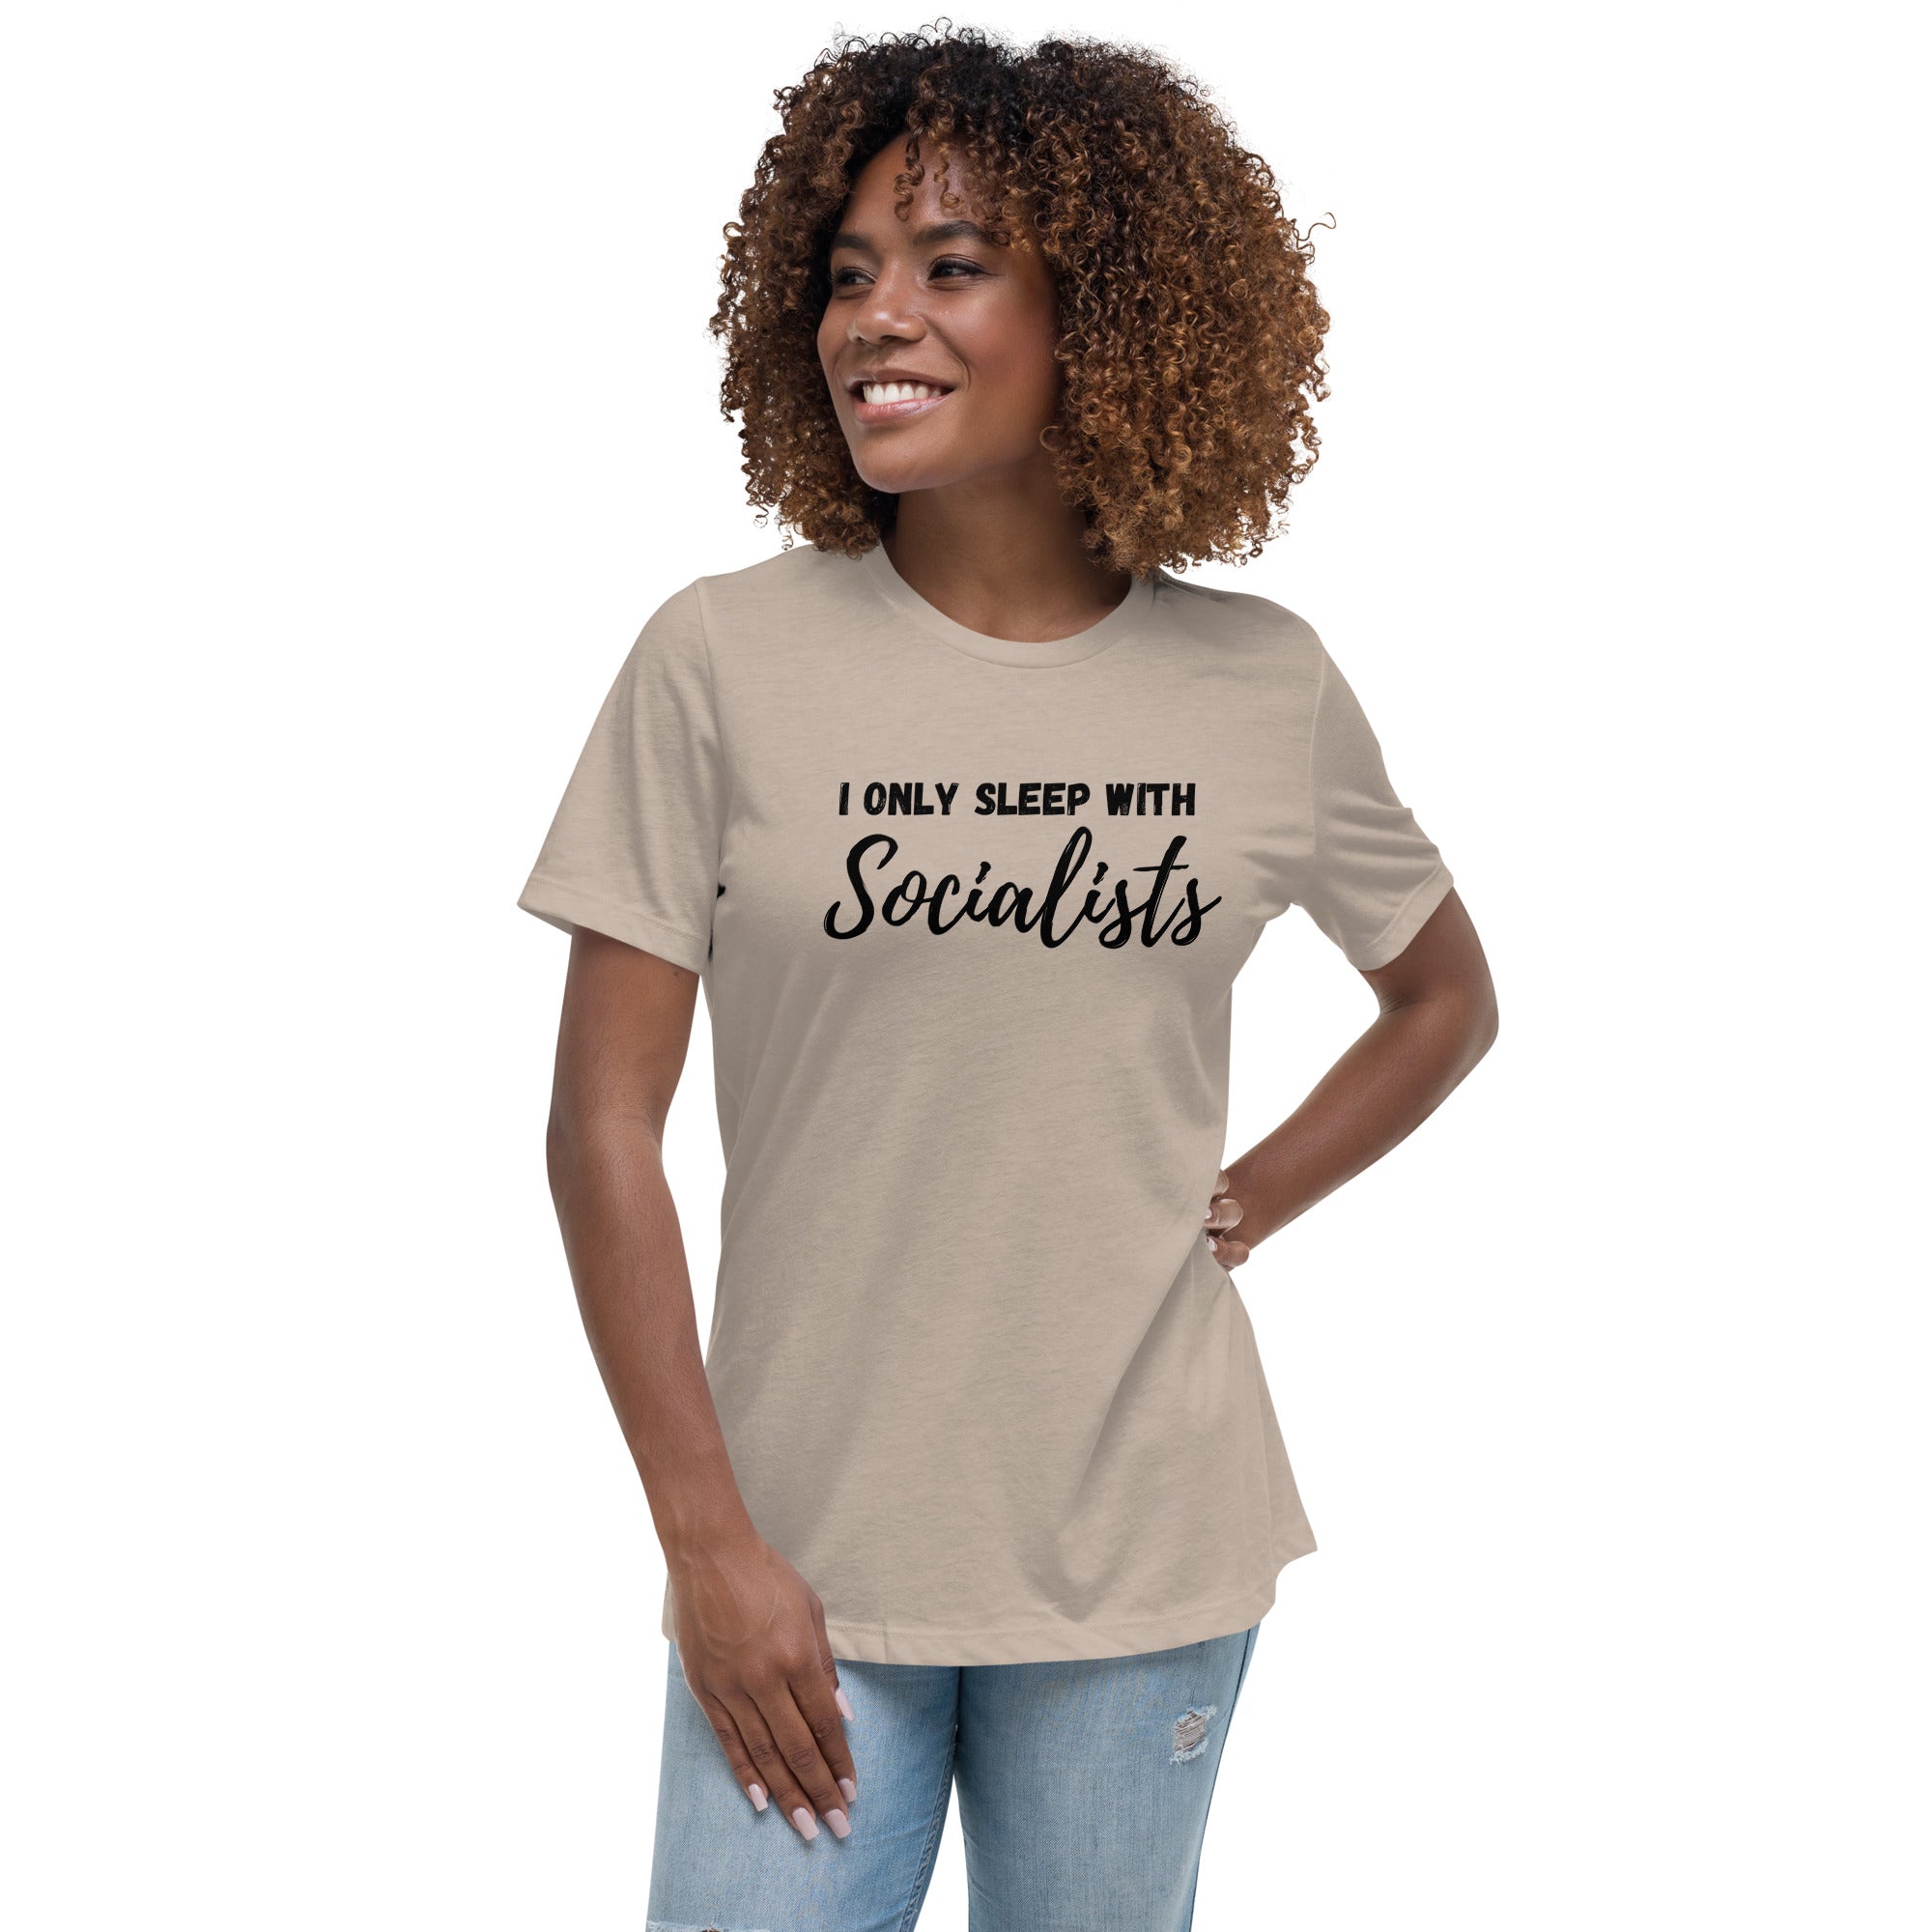 I Only Sleep With Socialists - Women's Relaxed T-Shirt